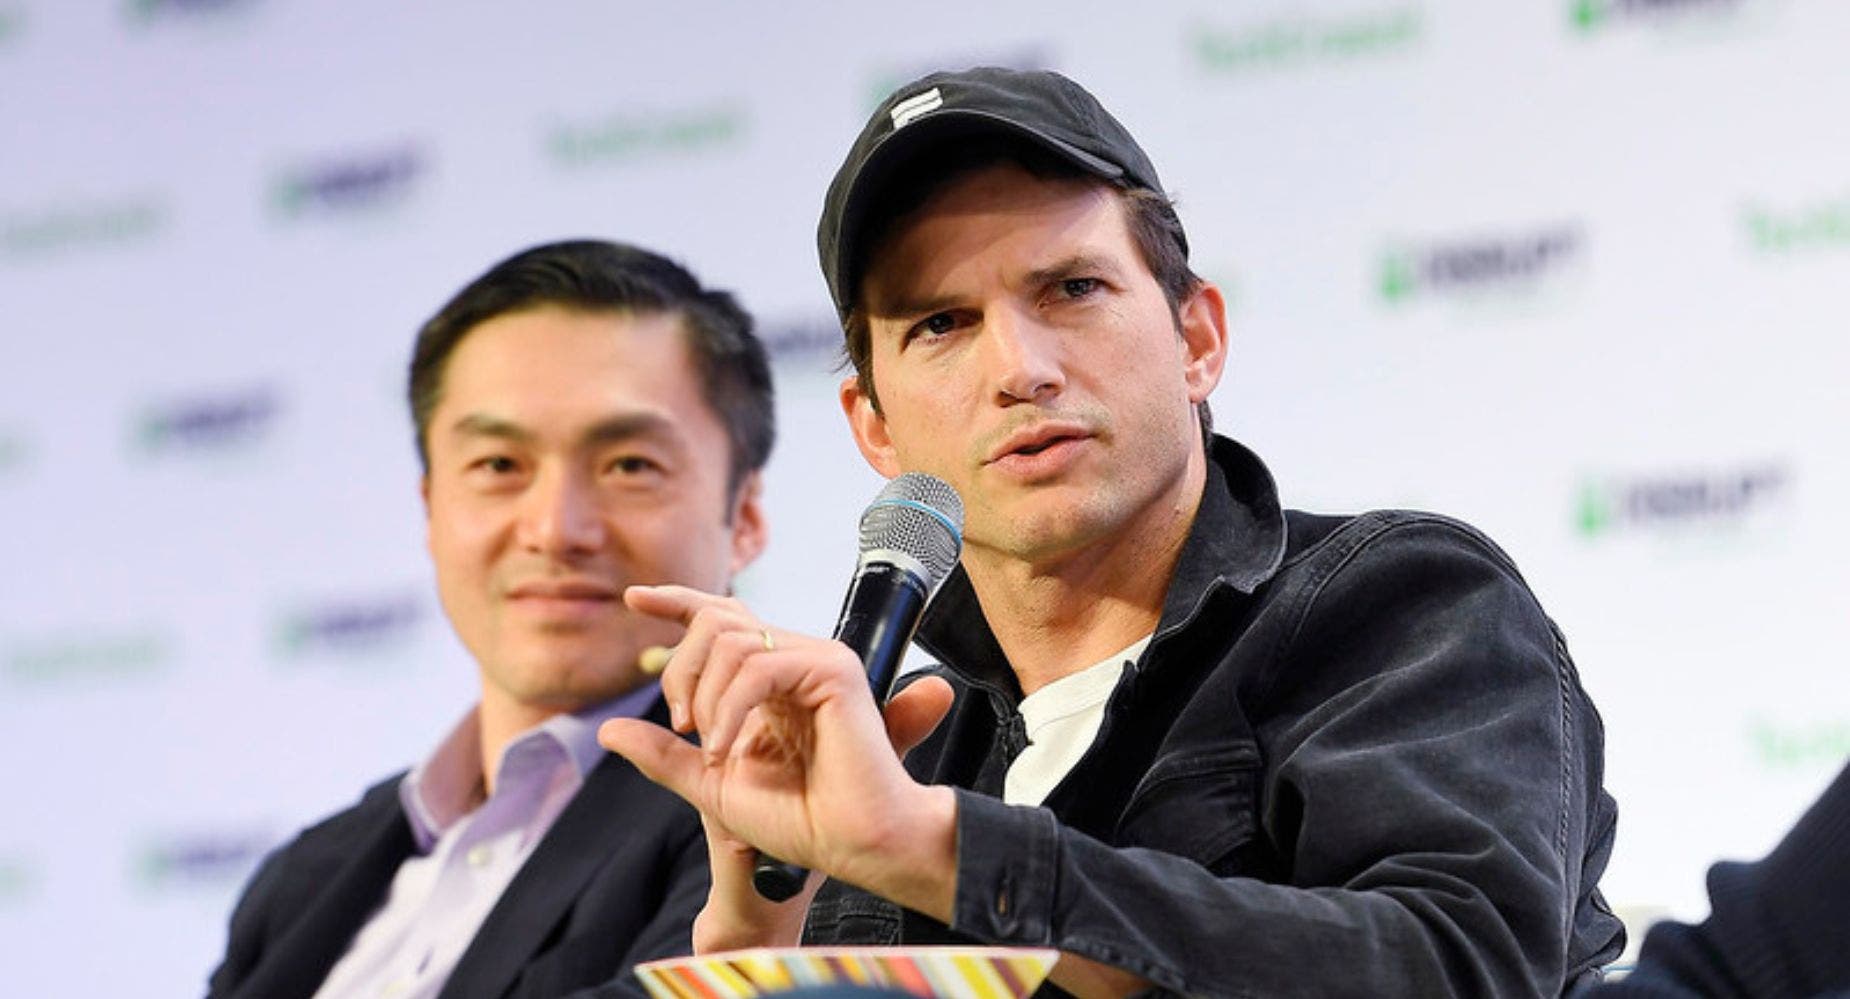 How Did Ashton Kutcher Amass A $250M Investing Fortune? His Instinct To Spot Future Winners